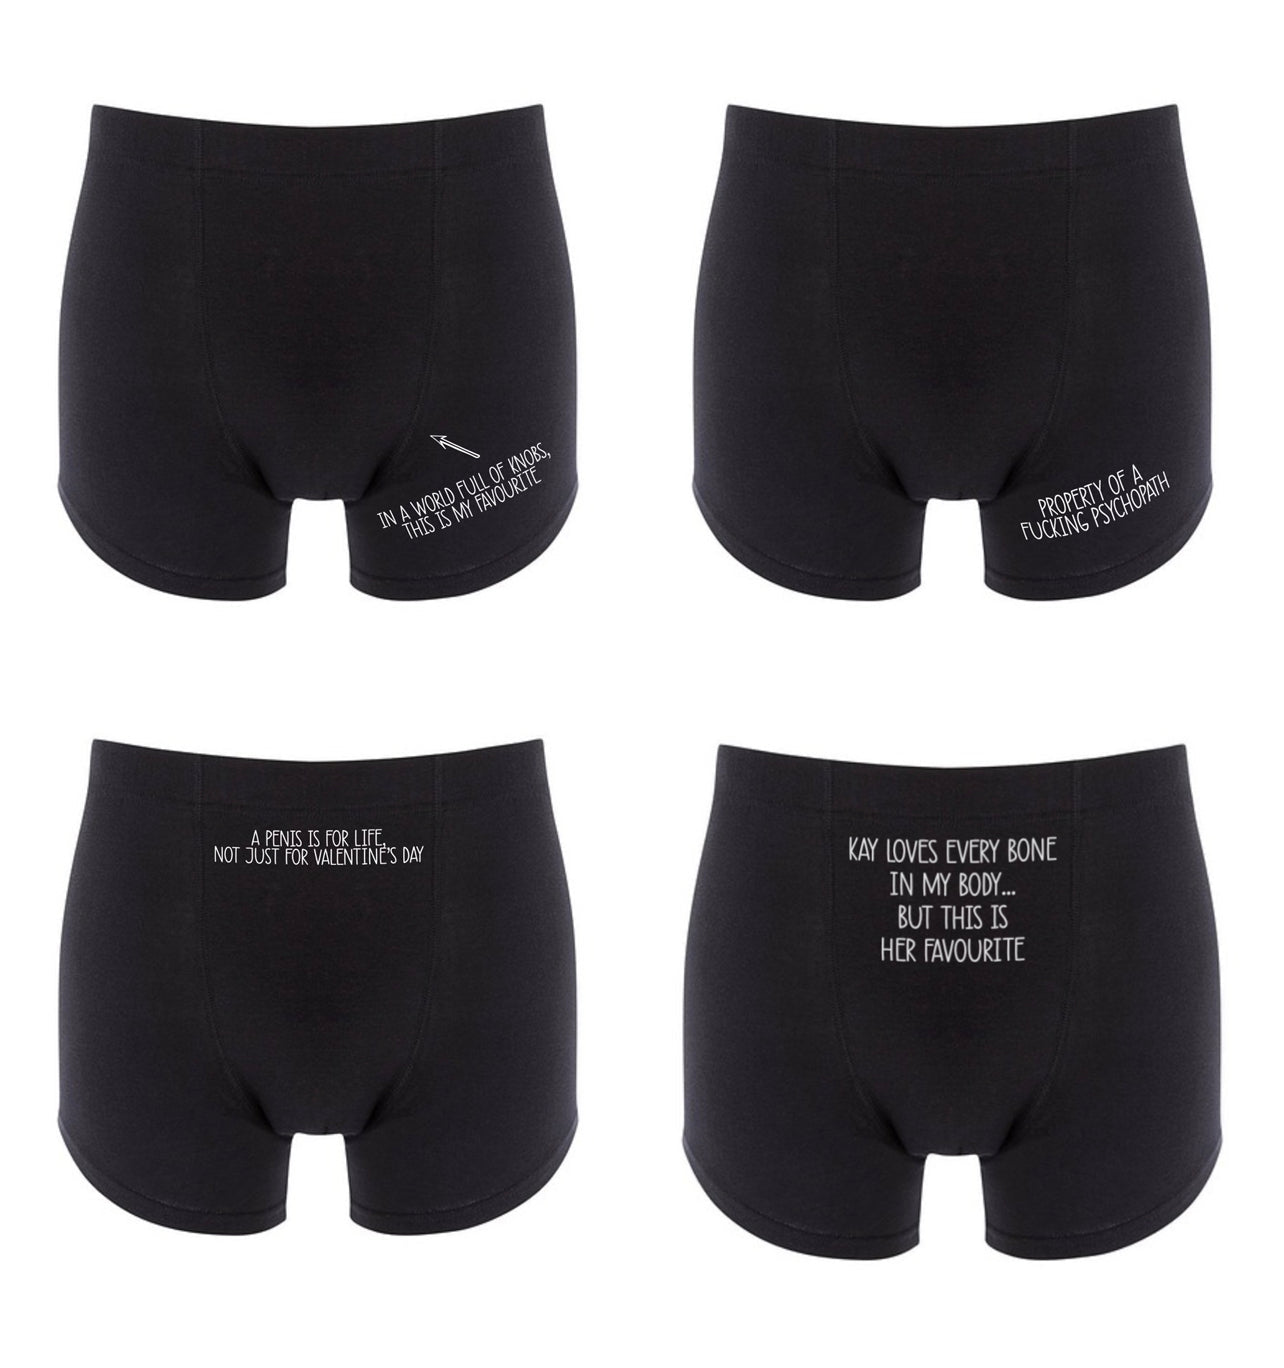 4 pairs of mens boxer short. pants featuring different adult banter quotes to the left legs, in white.